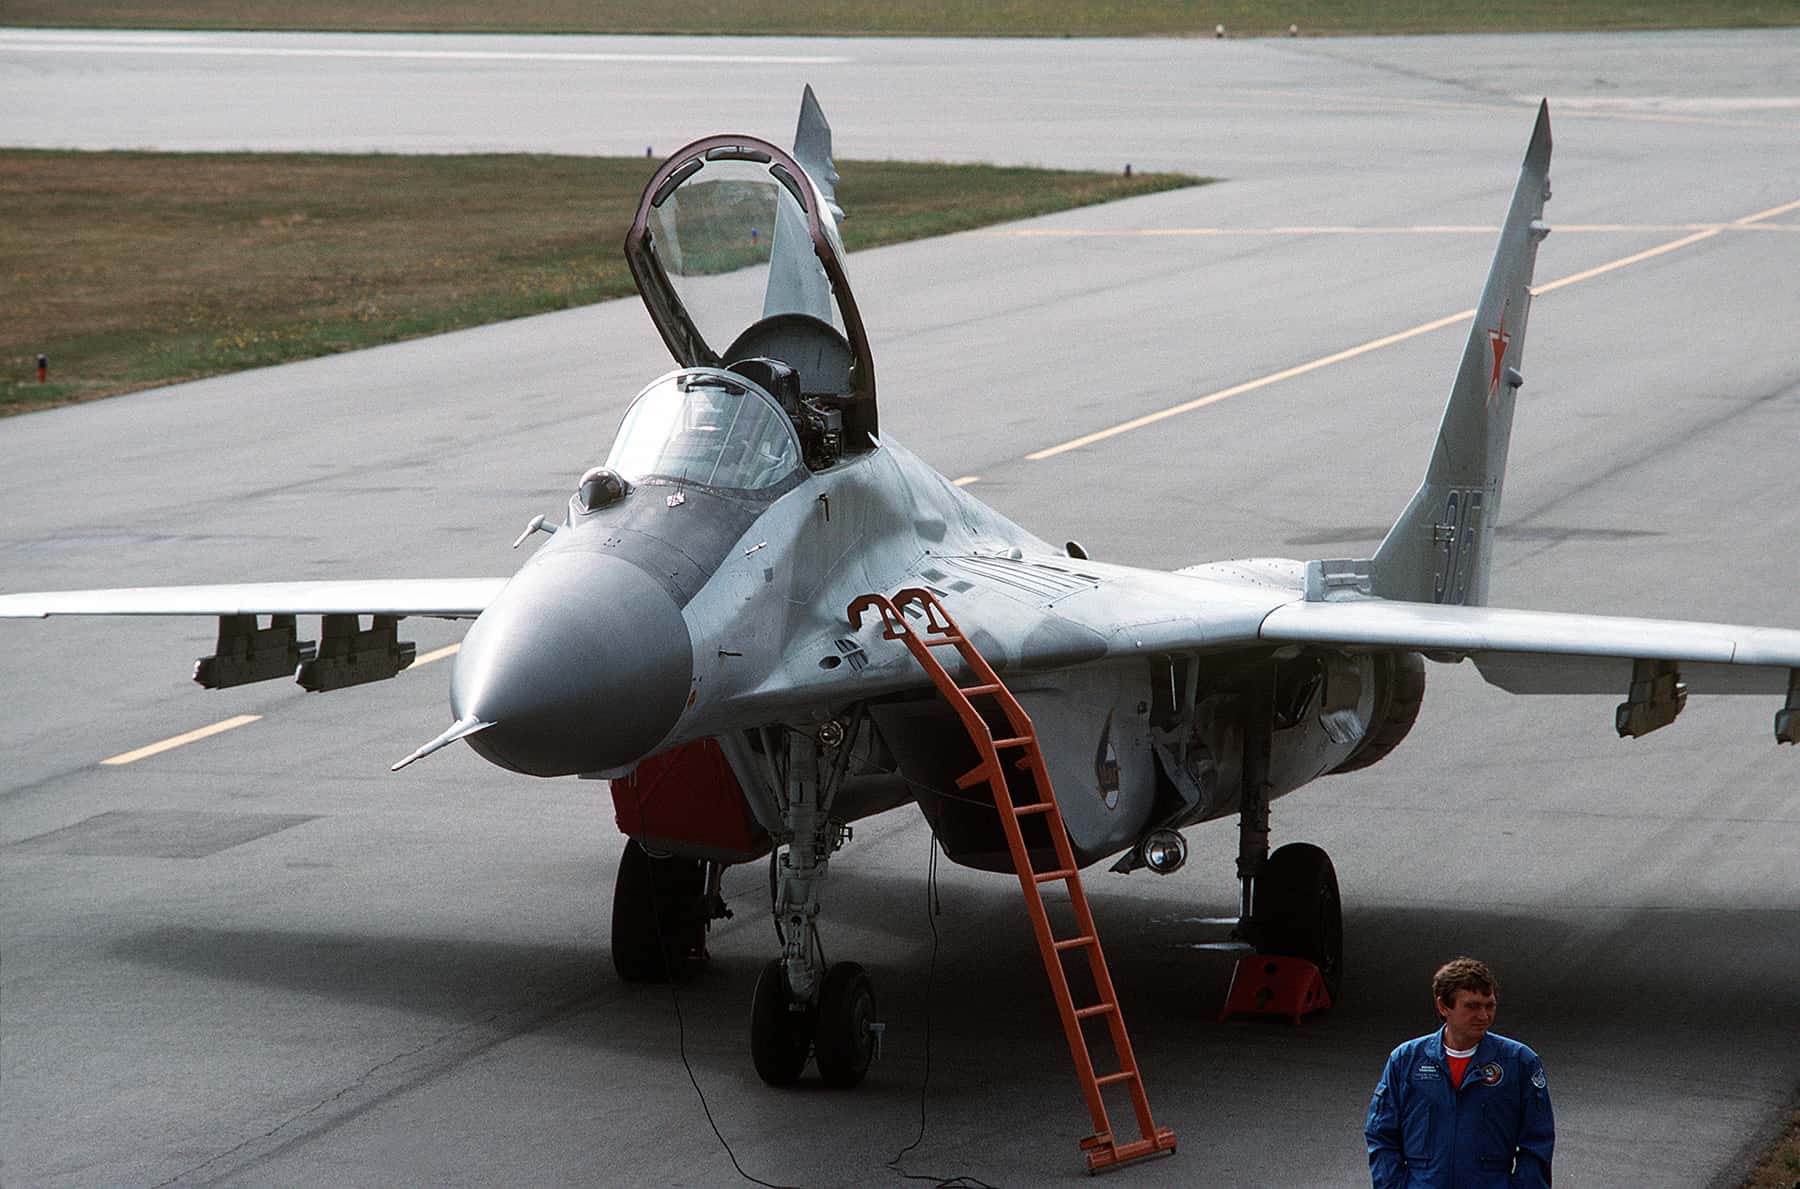 View of a Russian MiG-29 fighter parked on the ramp after a demonstration flight for attendees at the Abbotsford Air Show, July 1, 1989.